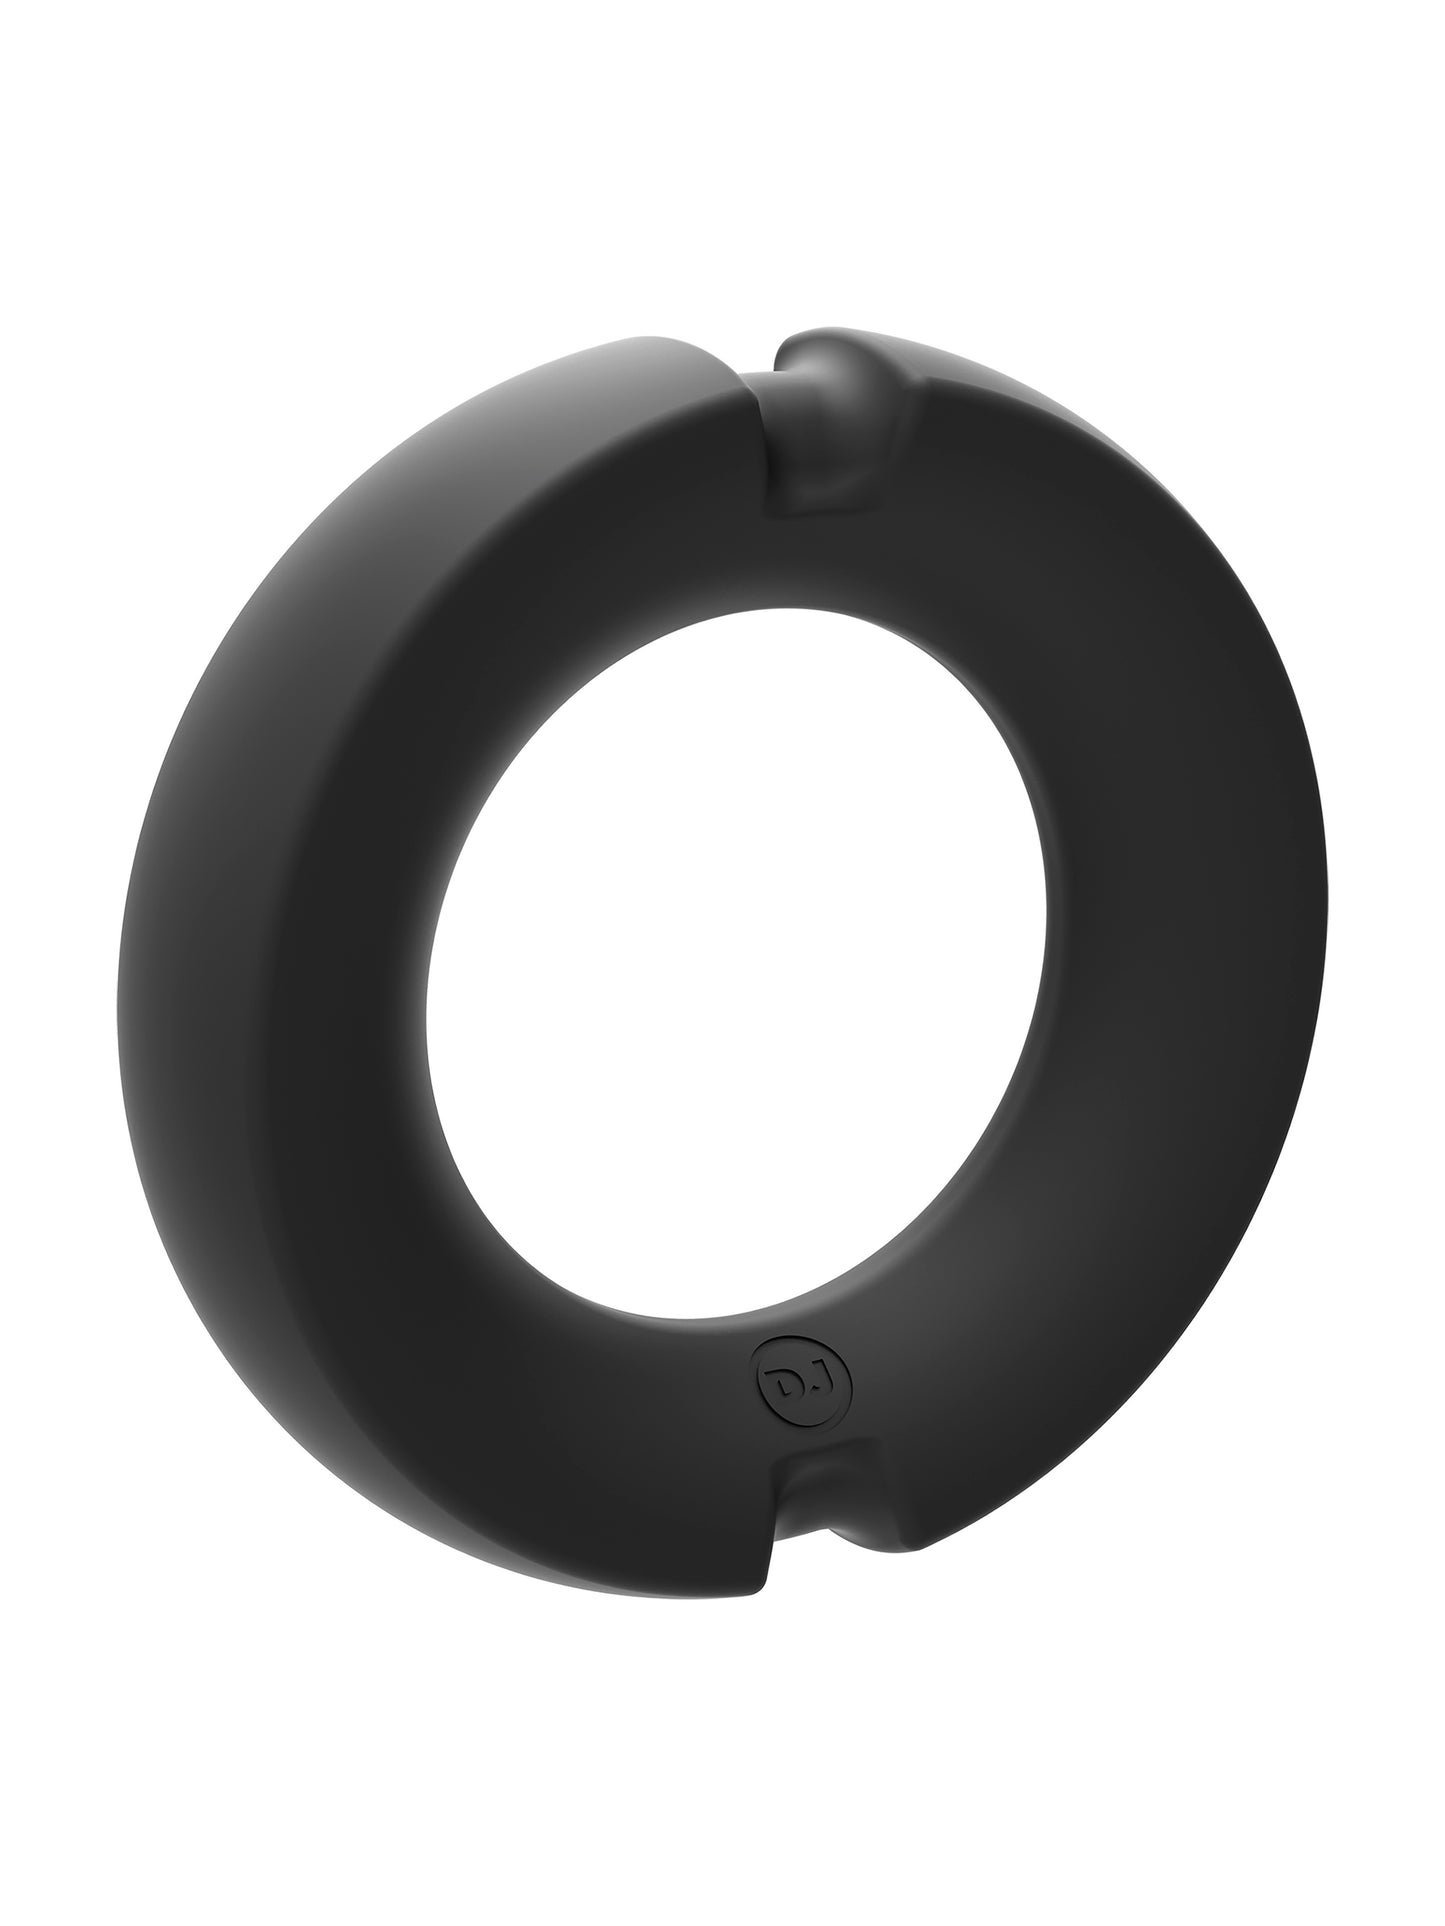 Doc Johnson - Silicone Cockring with Metal Inside - 1.38" / 35 mm